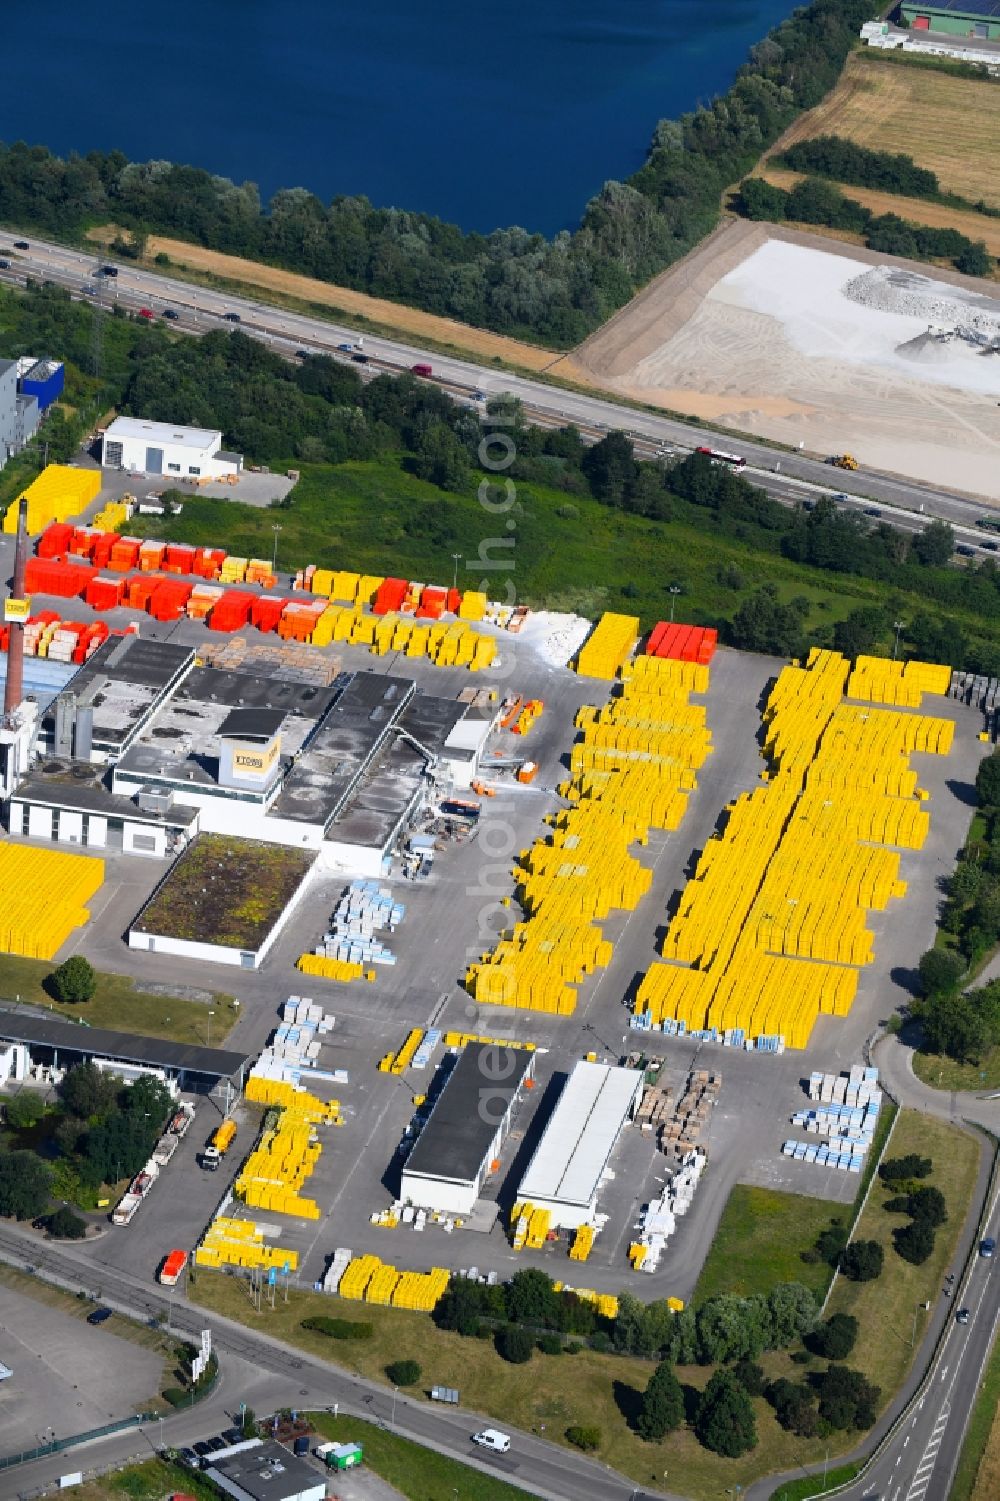 Aerial image Malsch - Building Materials and logistics center of Bau- and Projektmanagement Sued GmbH - Ytong Bausatzhaus Partner on Daimlerstrasse in Malsch in the state Baden-Wurttemberg, Germany